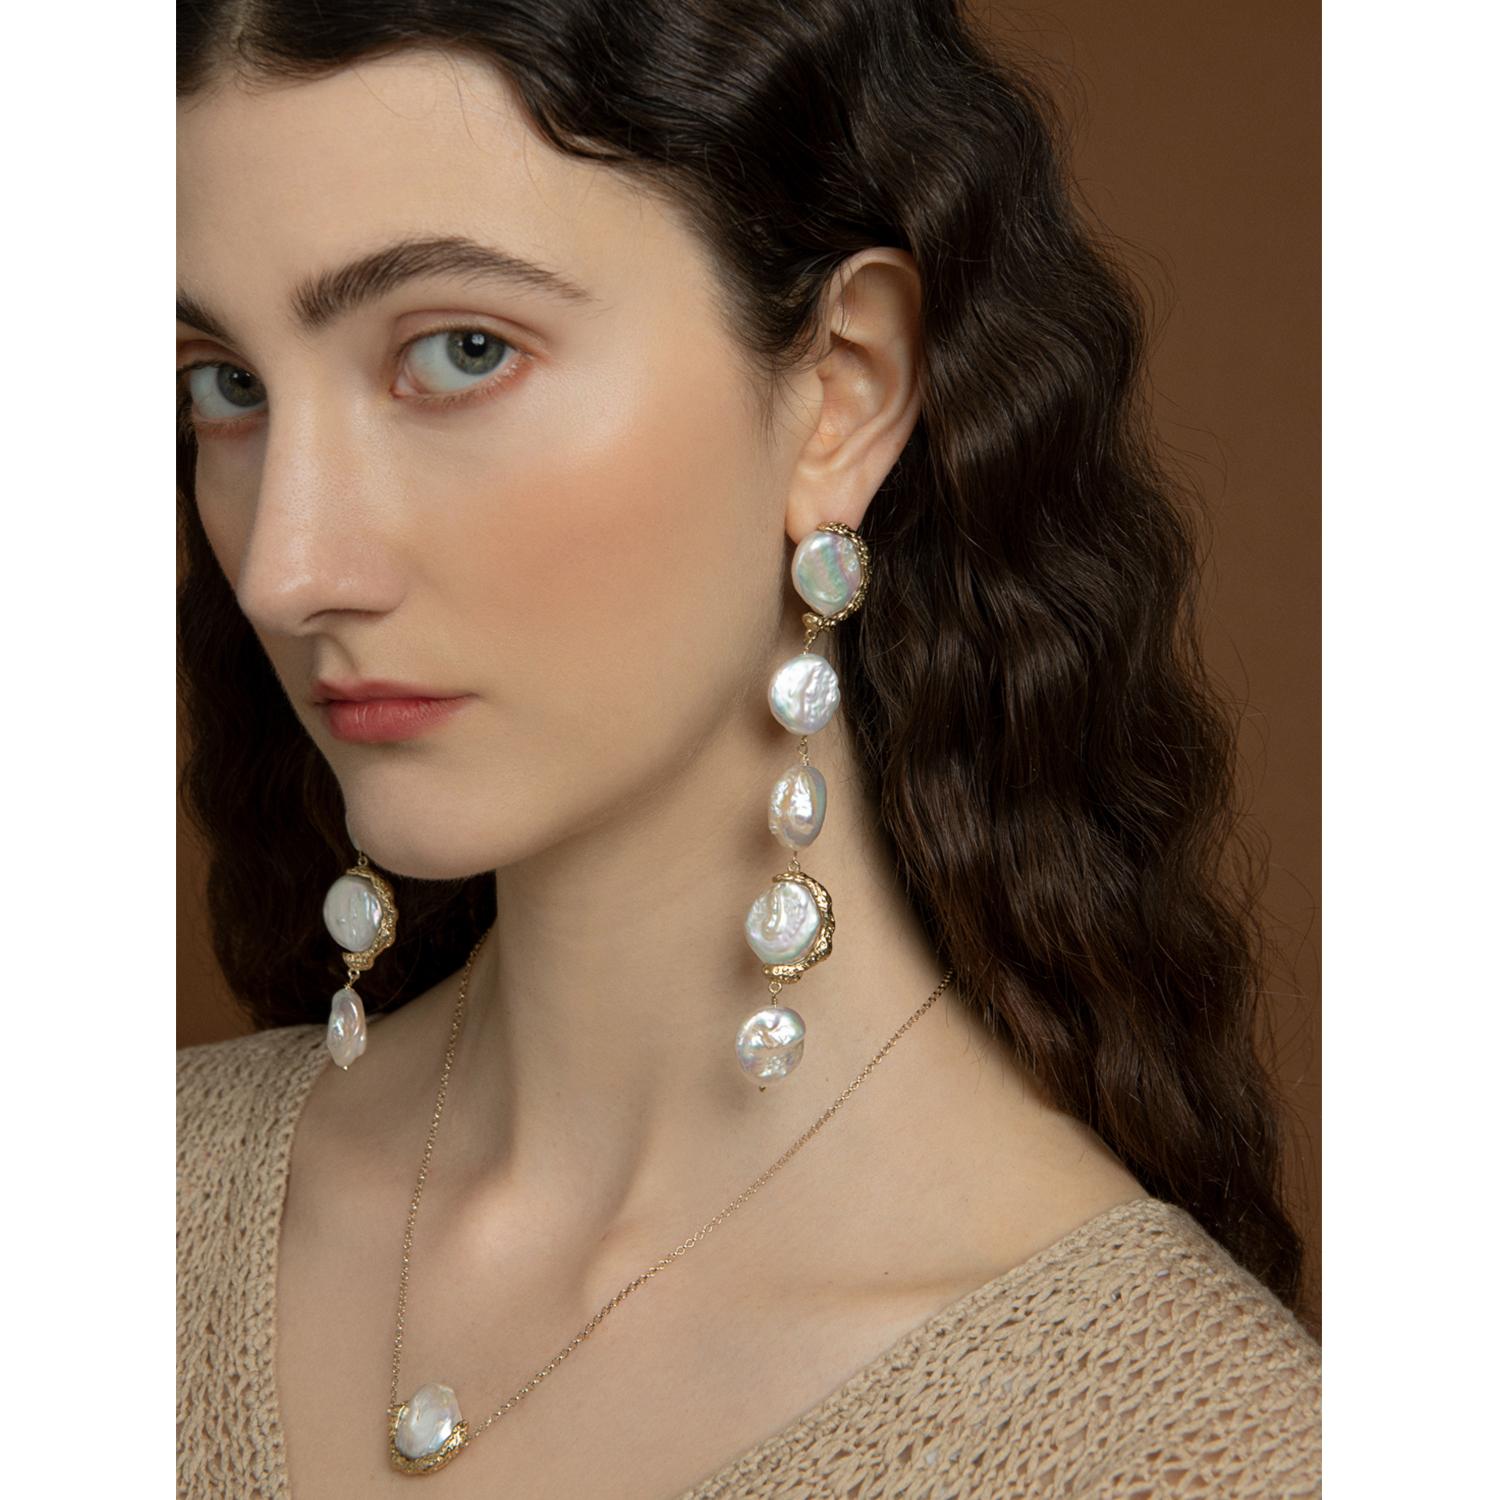 Cast from 18-karat gold-plated silver, these Ad Astra Pearl Statement Earrings by Vintouch Jewels pay homage to the uniqueness of each individual through the use of one-of-a-kind baroque pearls gently dangling on your lobes. They're masterfully